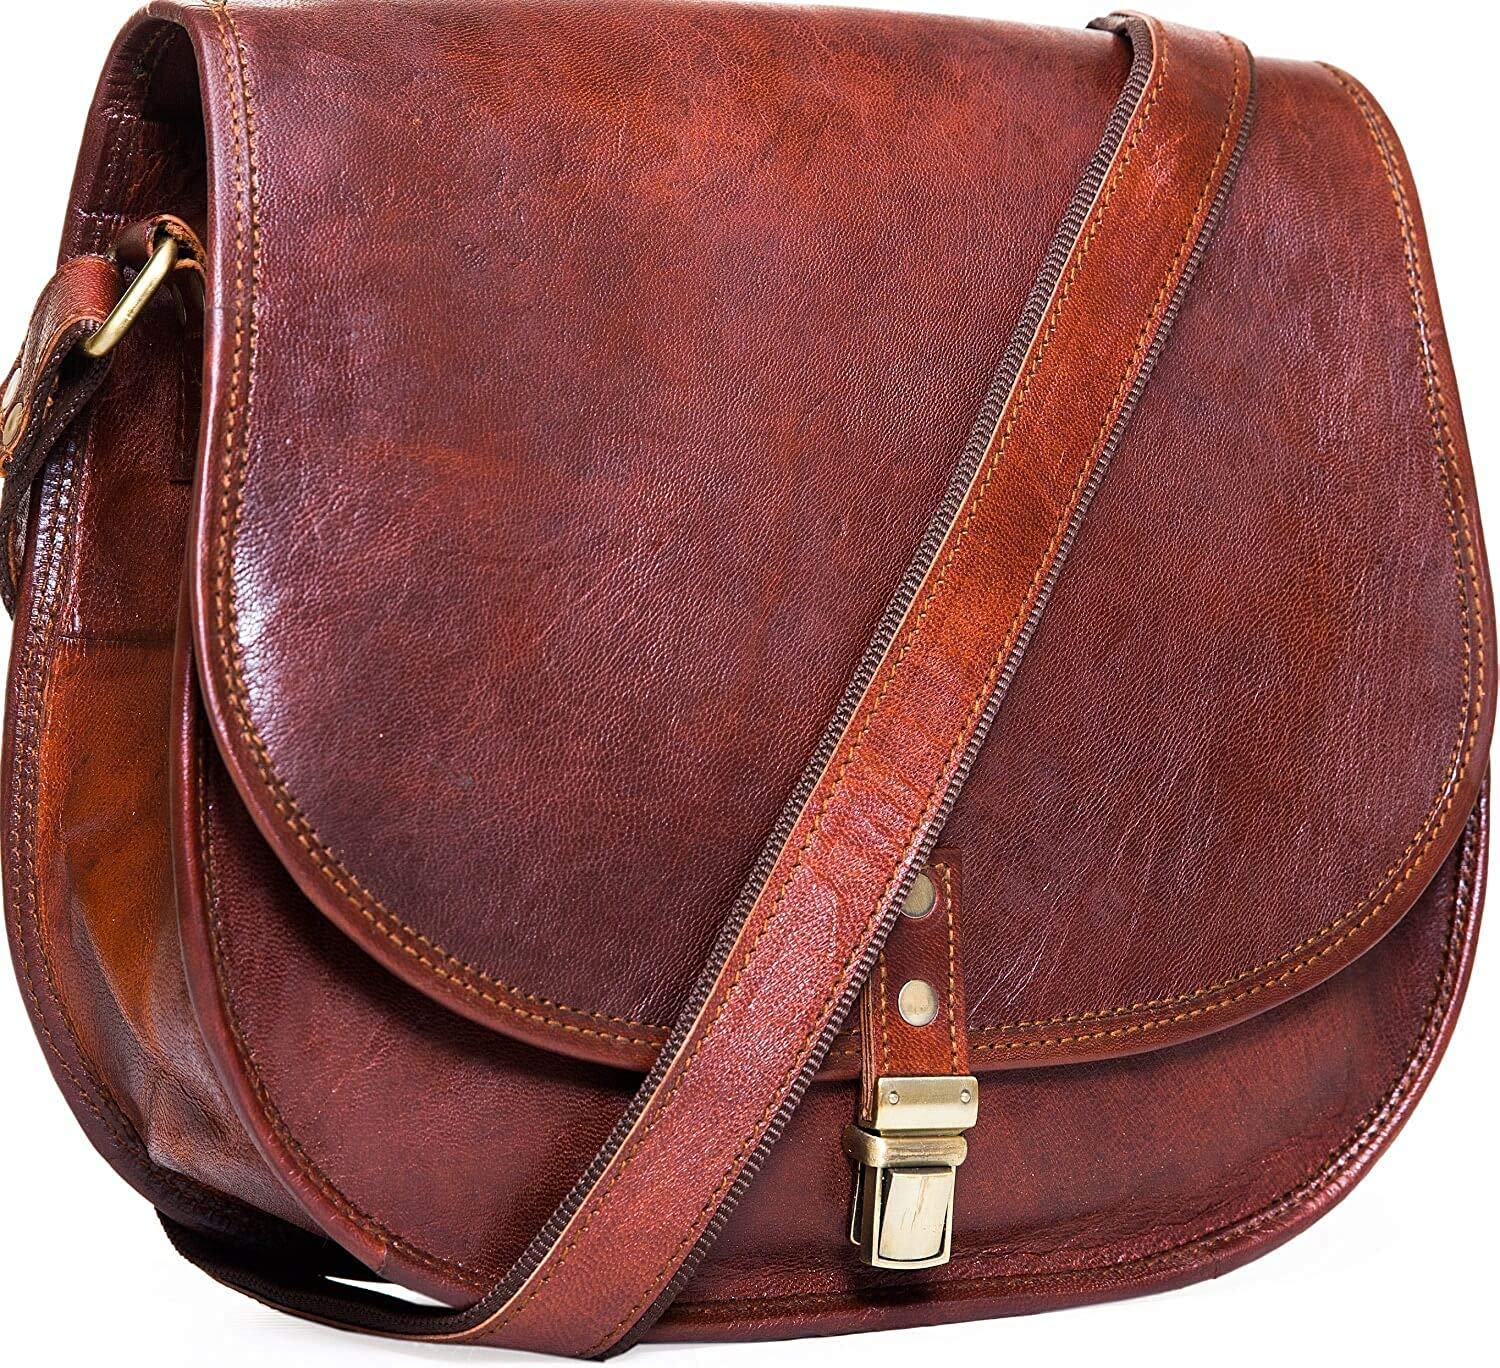 The Stellar Styles Leather Women S Handmade Pure Leather Shoulder